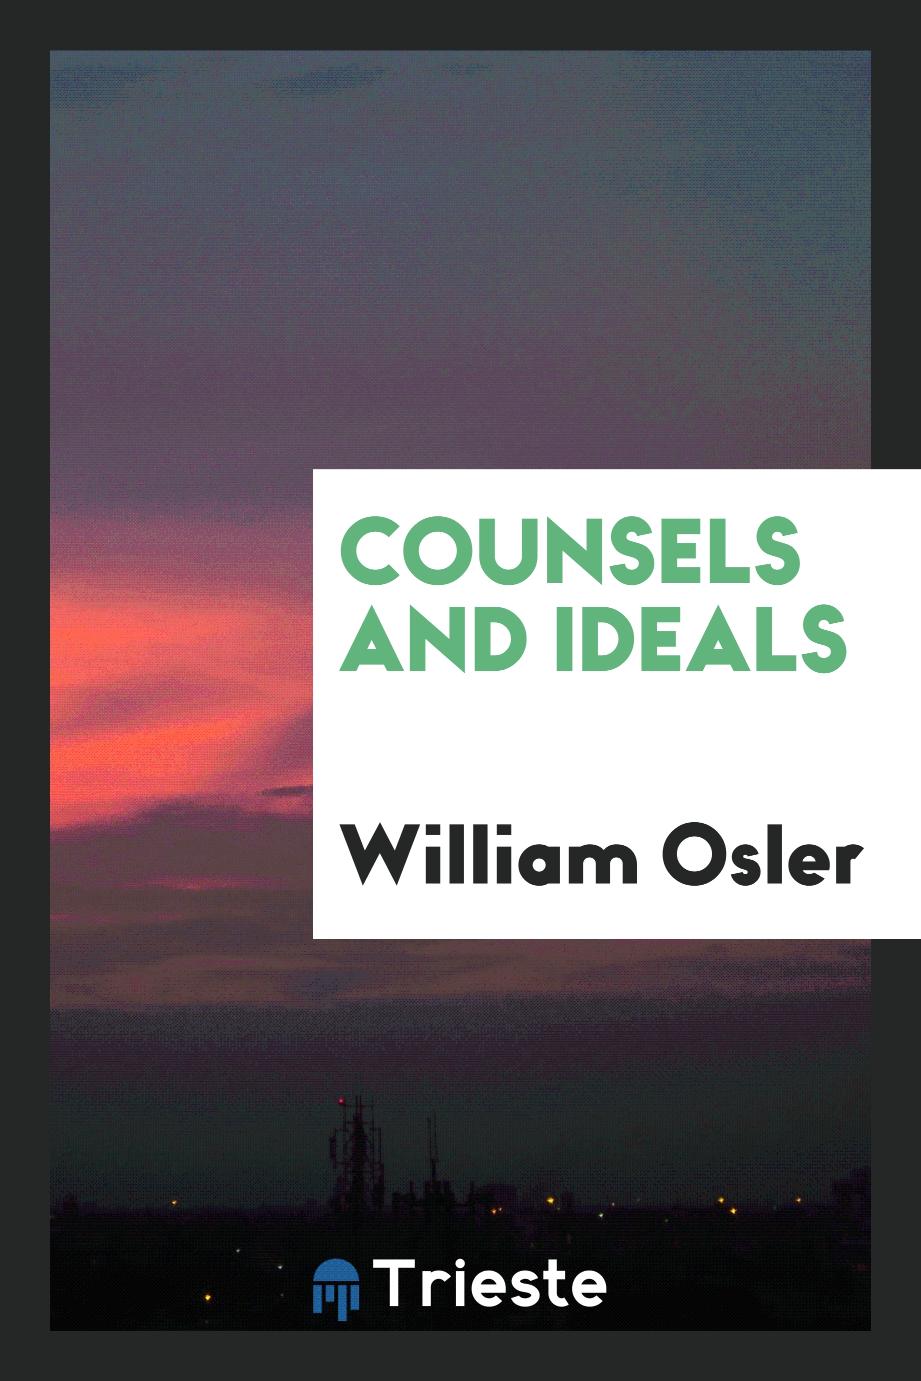 Counsels and Ideals